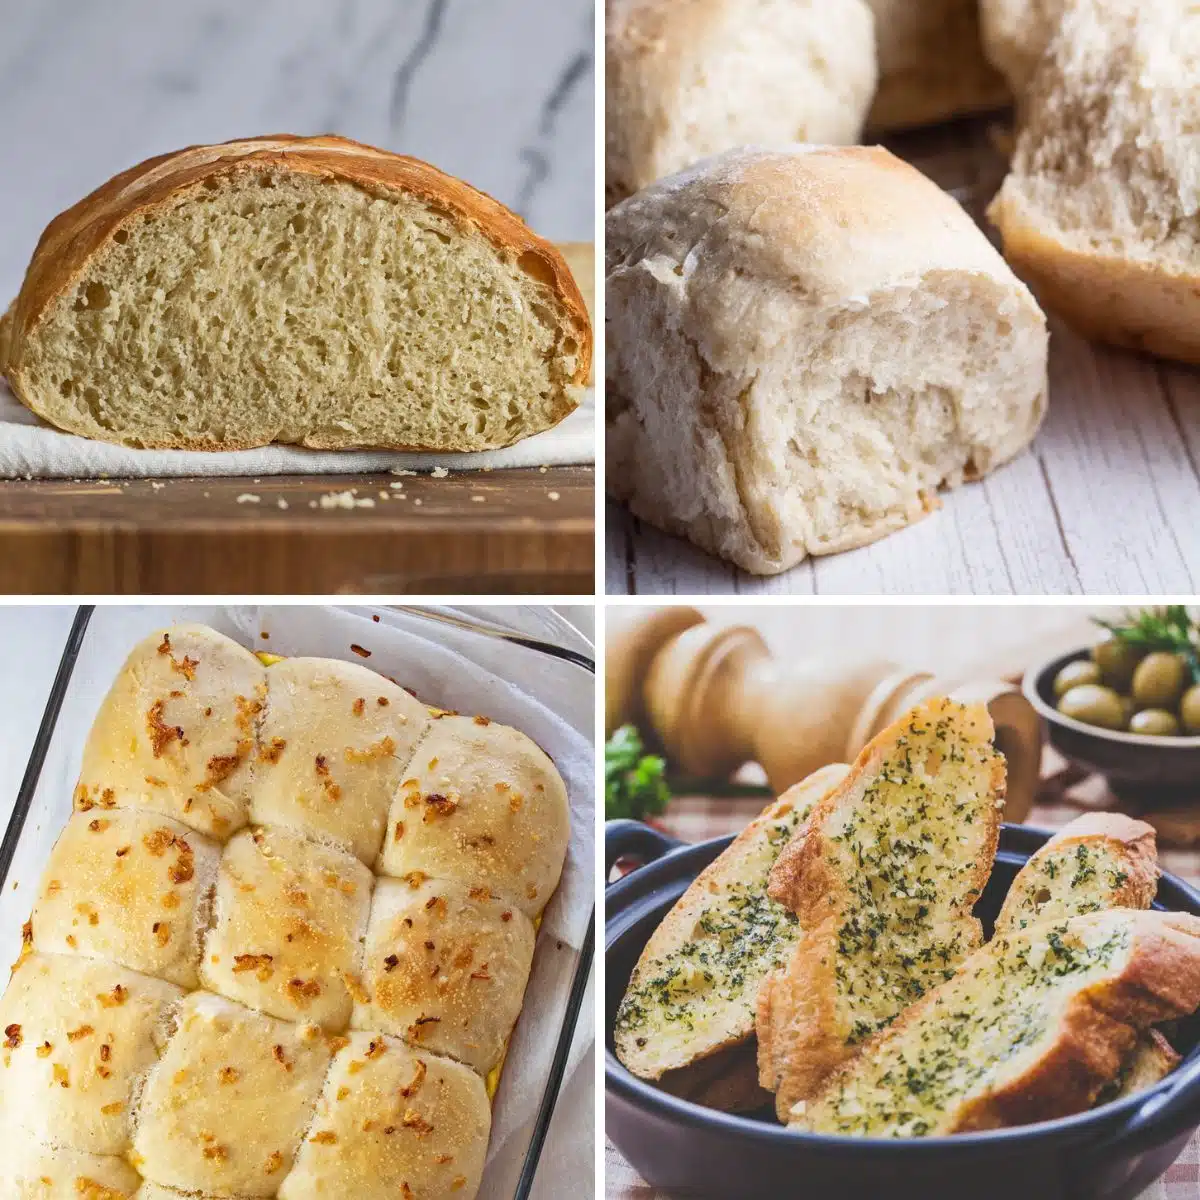 Best Thanksgiving dinner rolls and bread recipes to bake and share with your holiday meals.